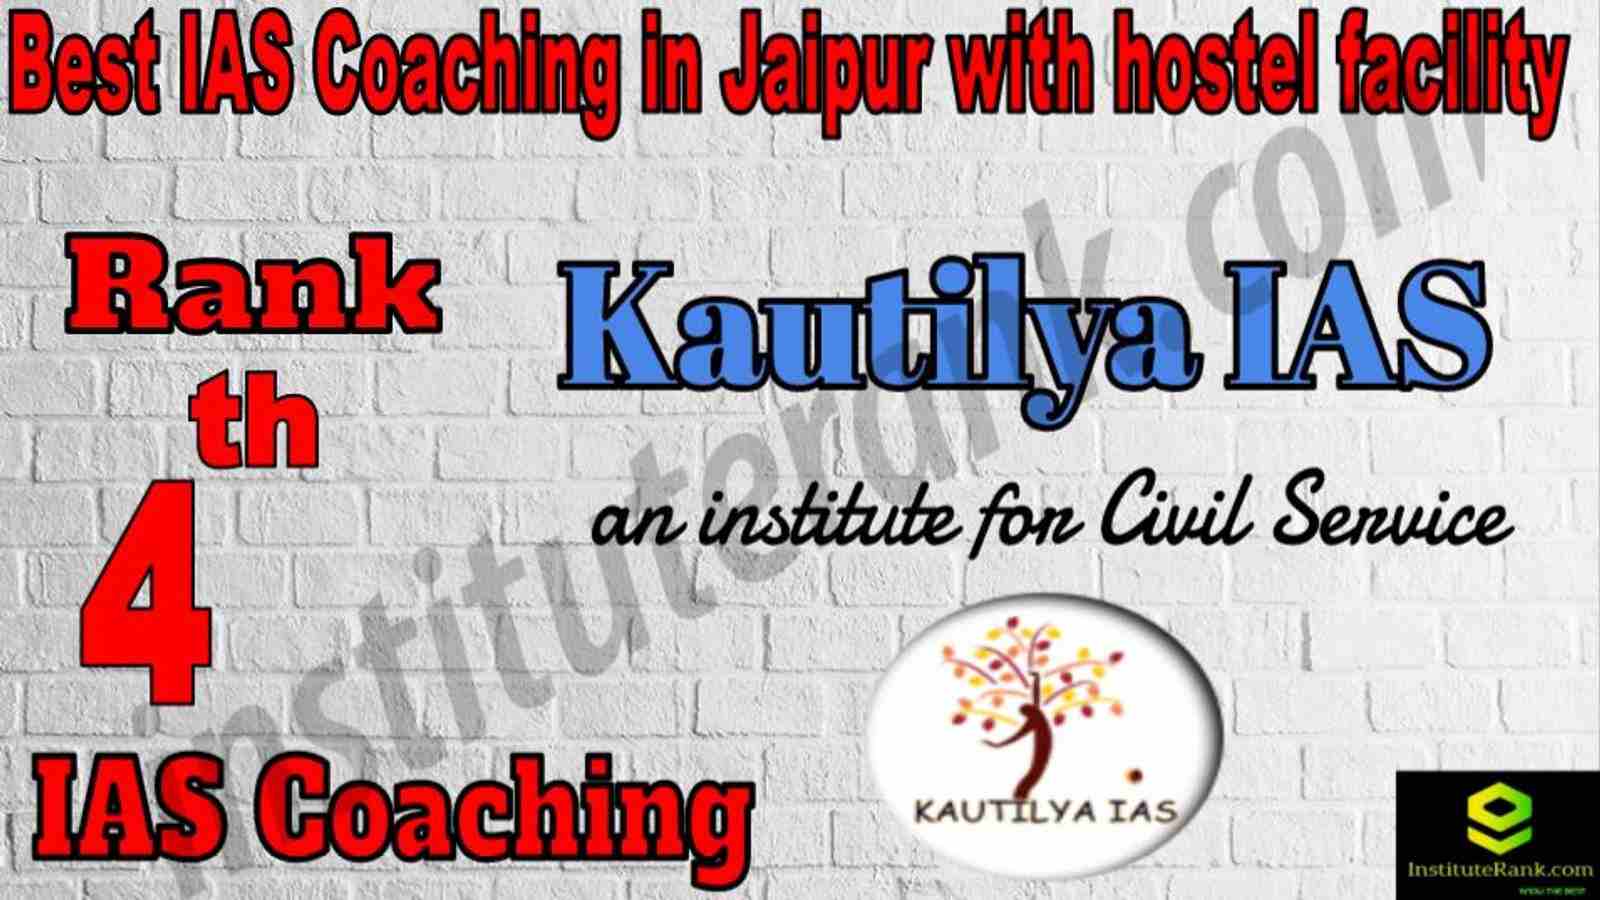 4th Best IAS Coaching in Jaipur with hostel facility